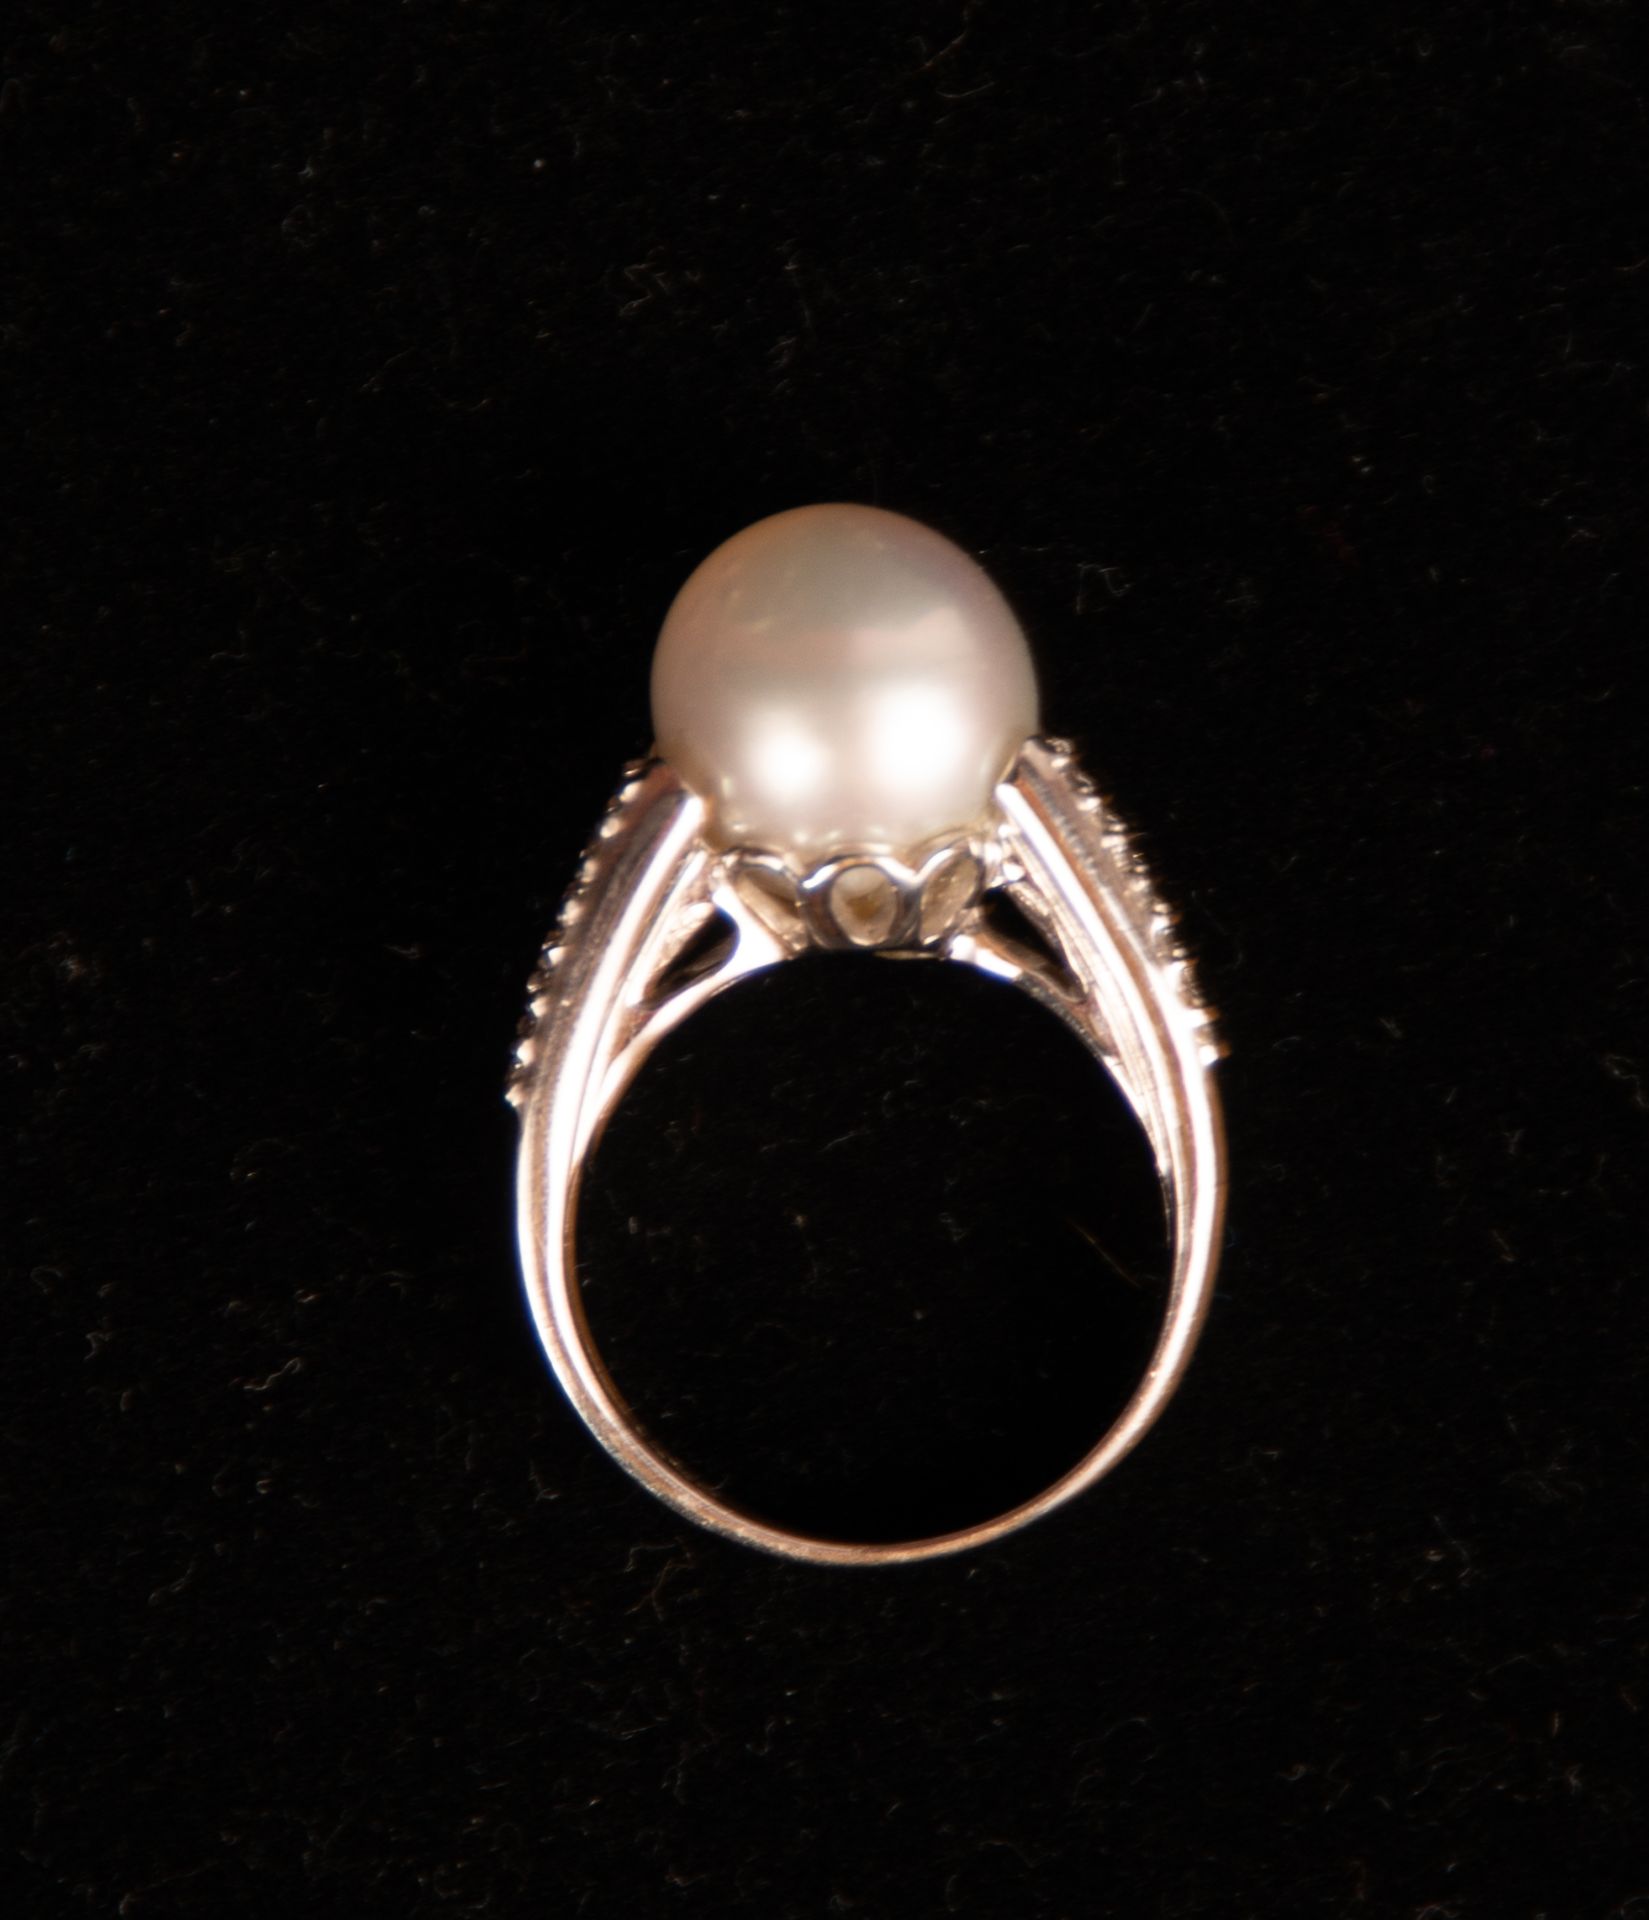 Ring in White Gold with a central Pearl and diamonds set - Image 4 of 4